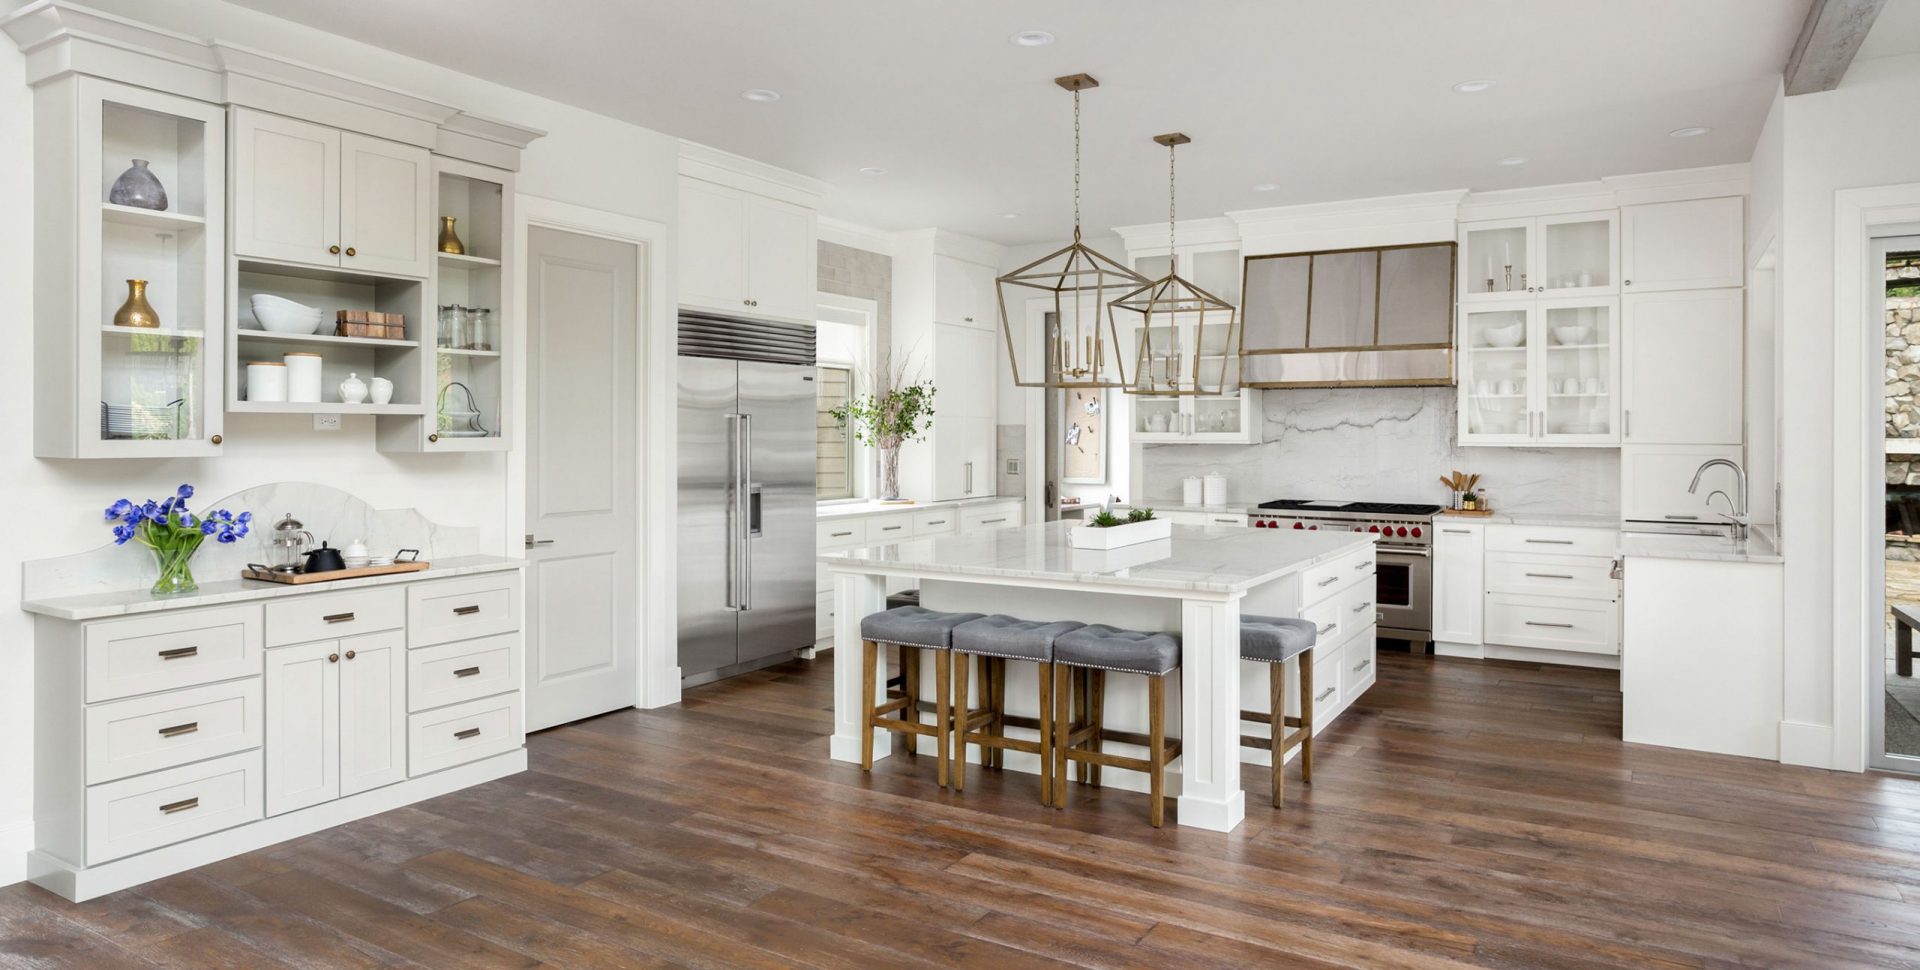 Large open space kitchen with white cabinets